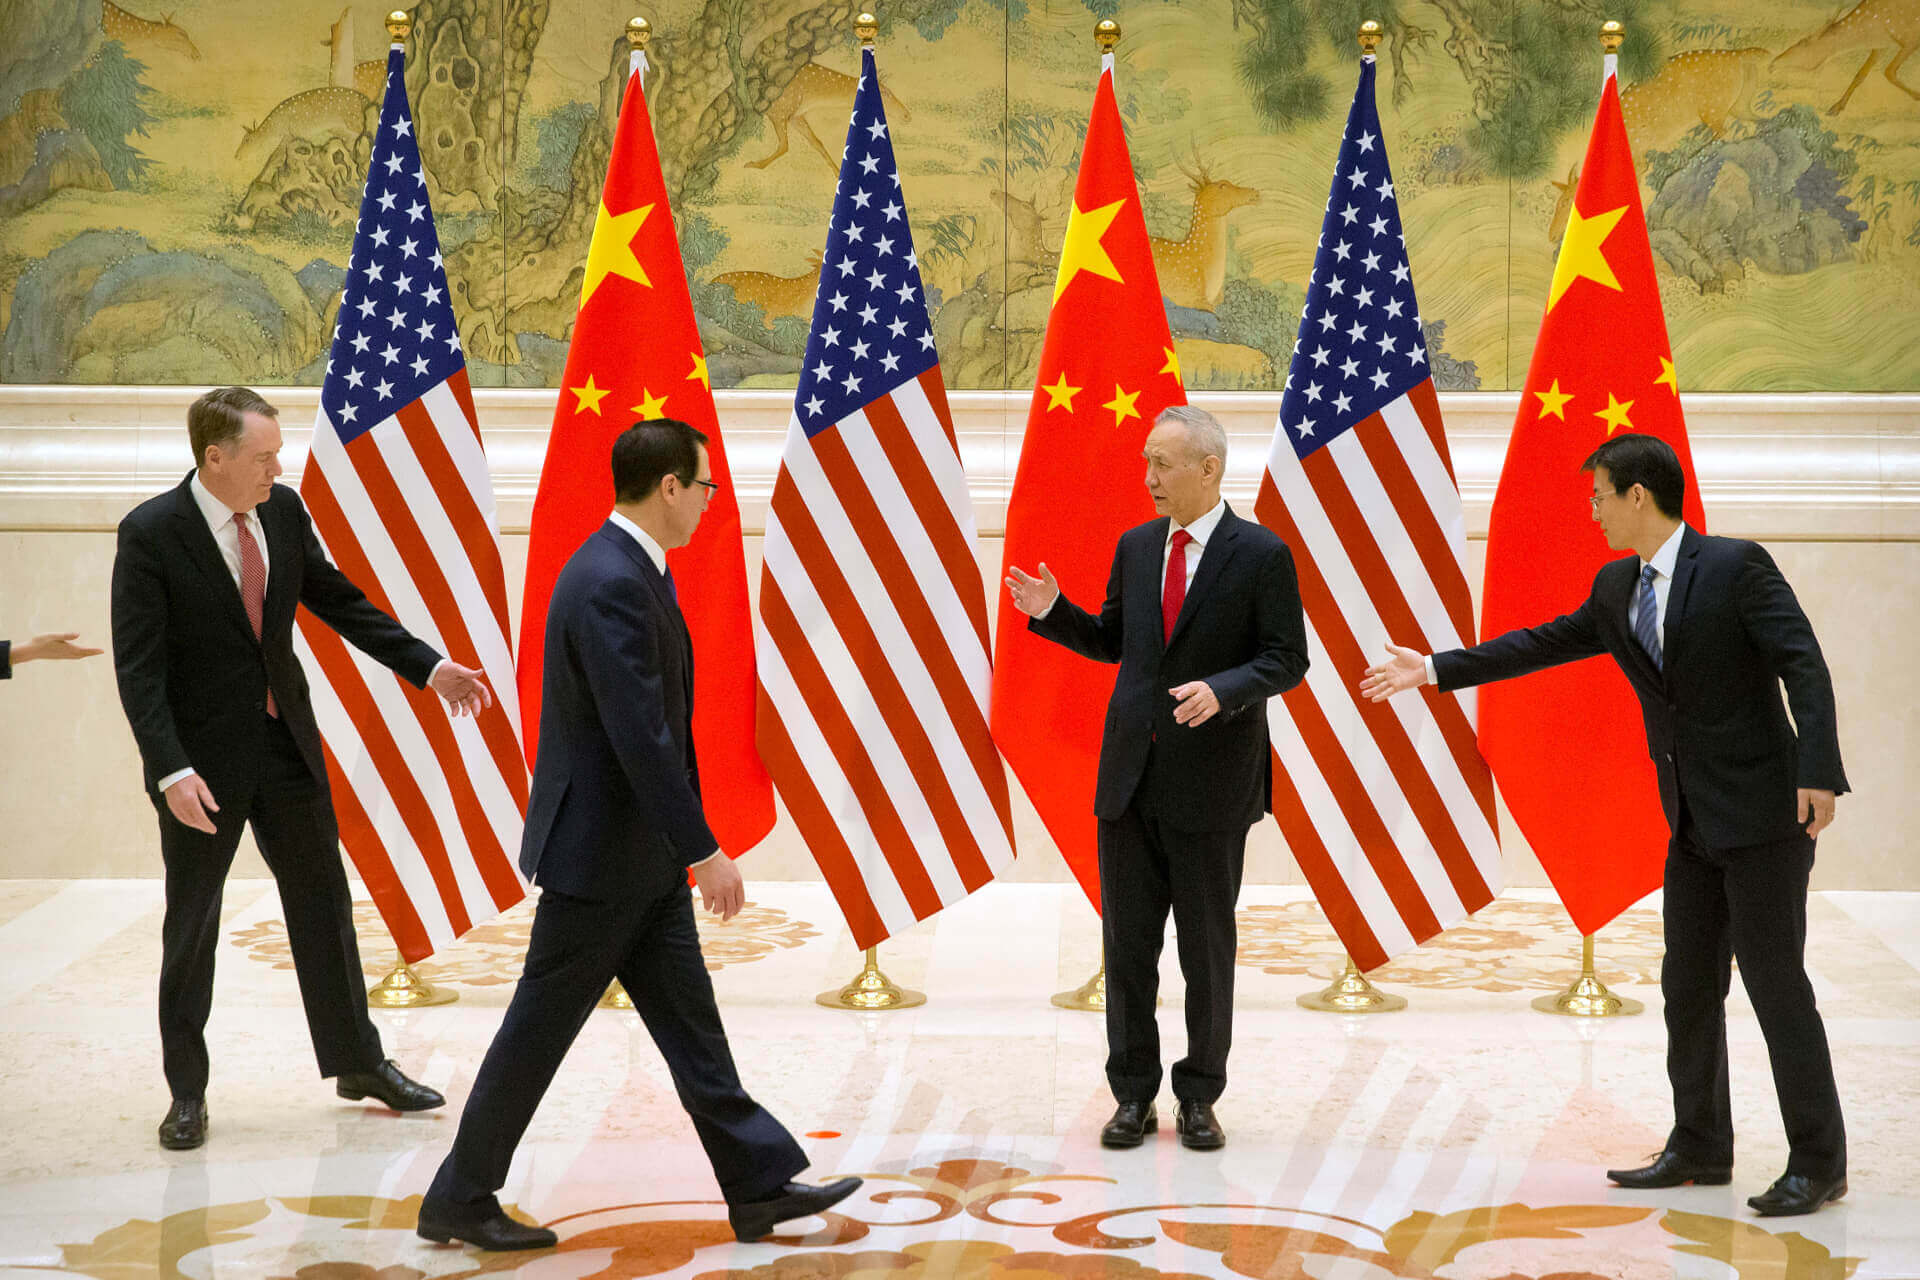 The US Does Not See China as an “Imagined” Enemy, Despite China’s Claims